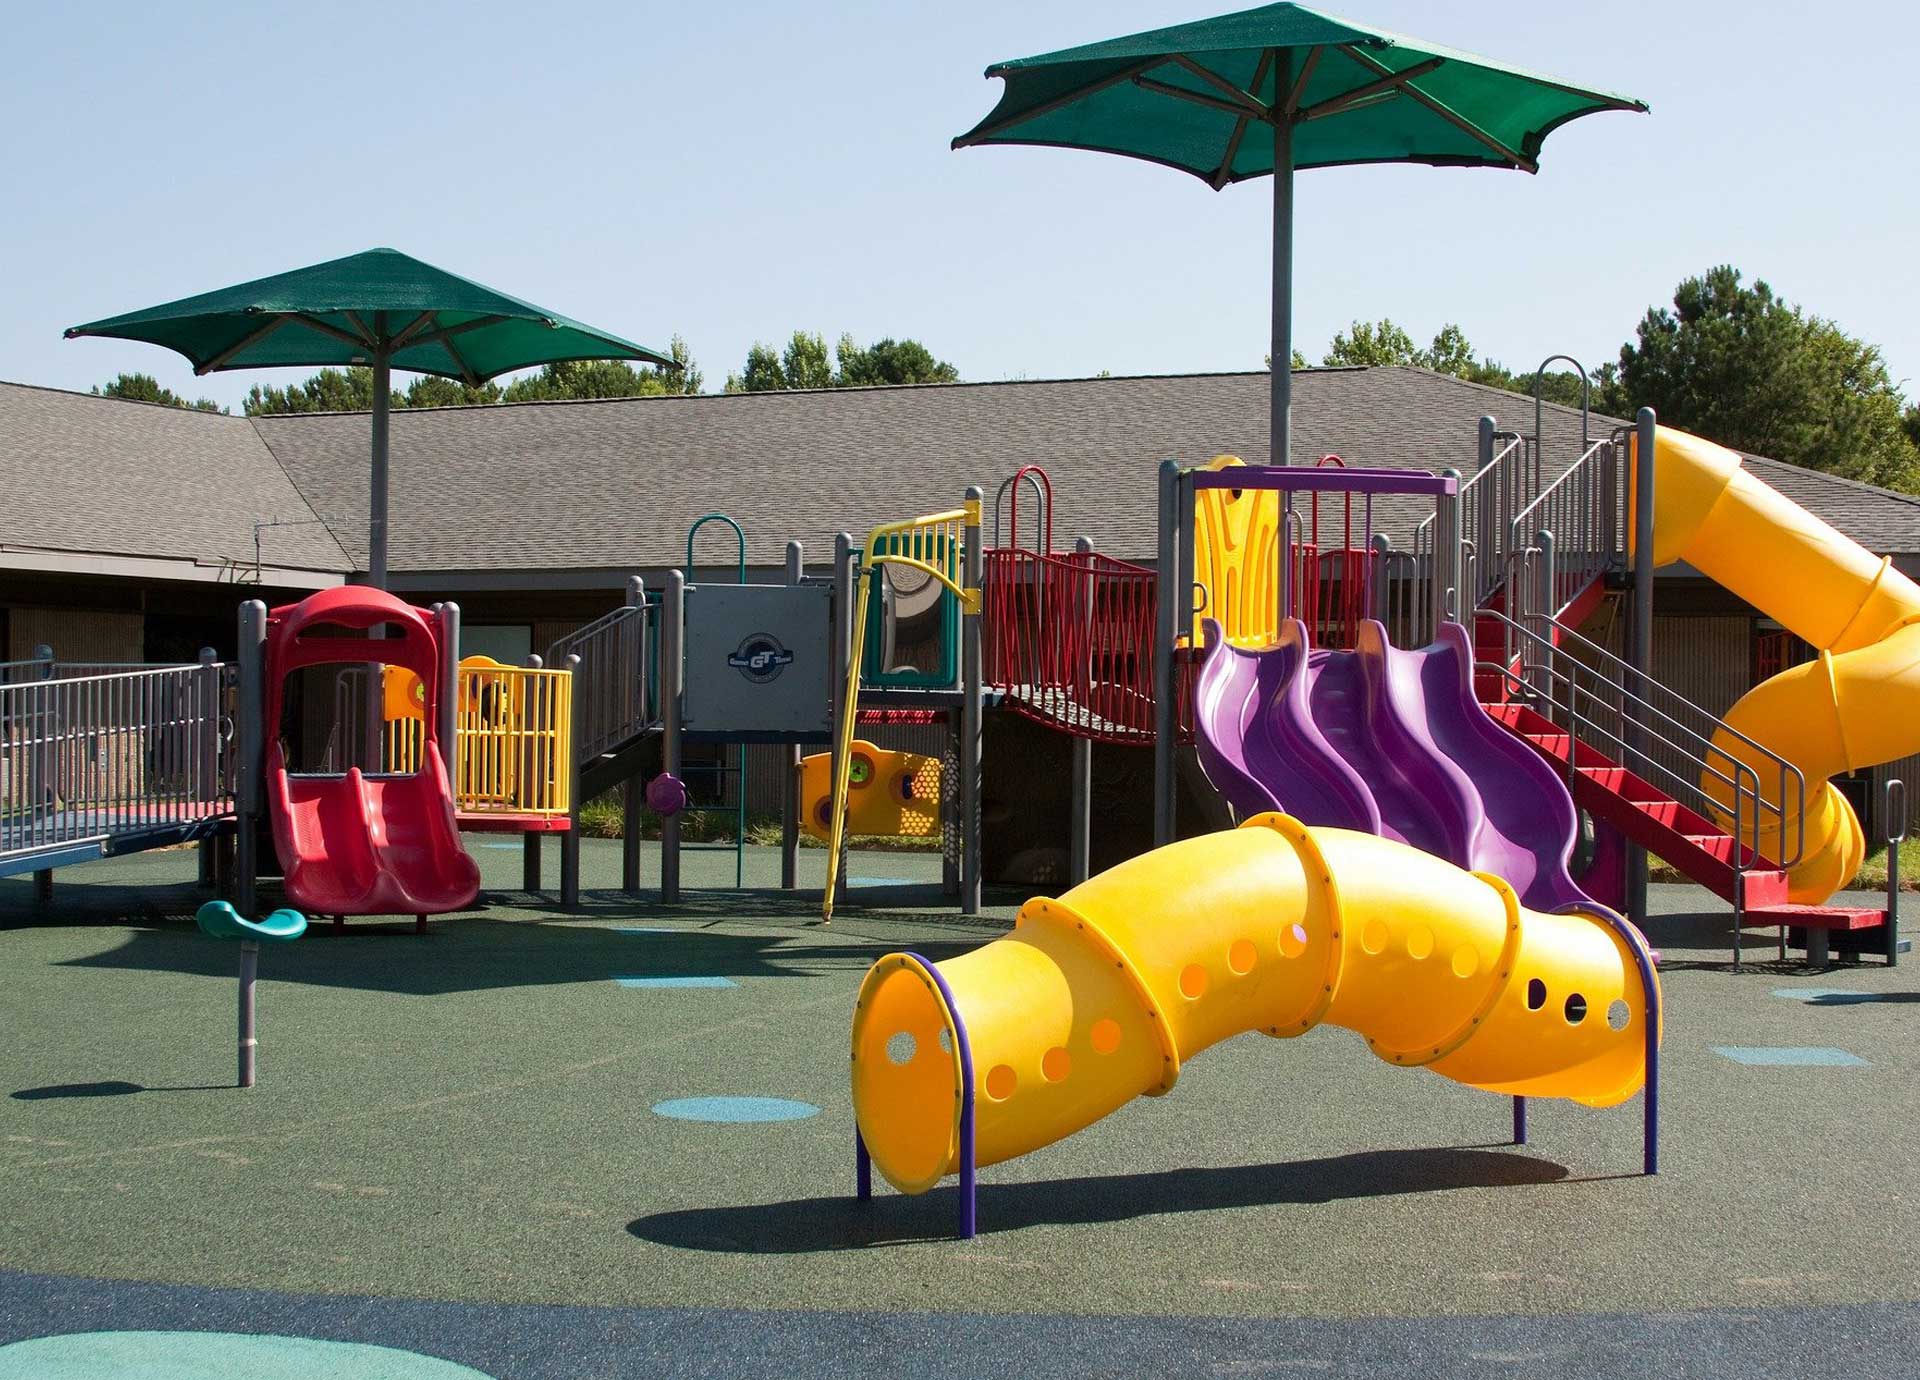 Playground Safety Tips for HOAs, Campgrounds, and Franchisees